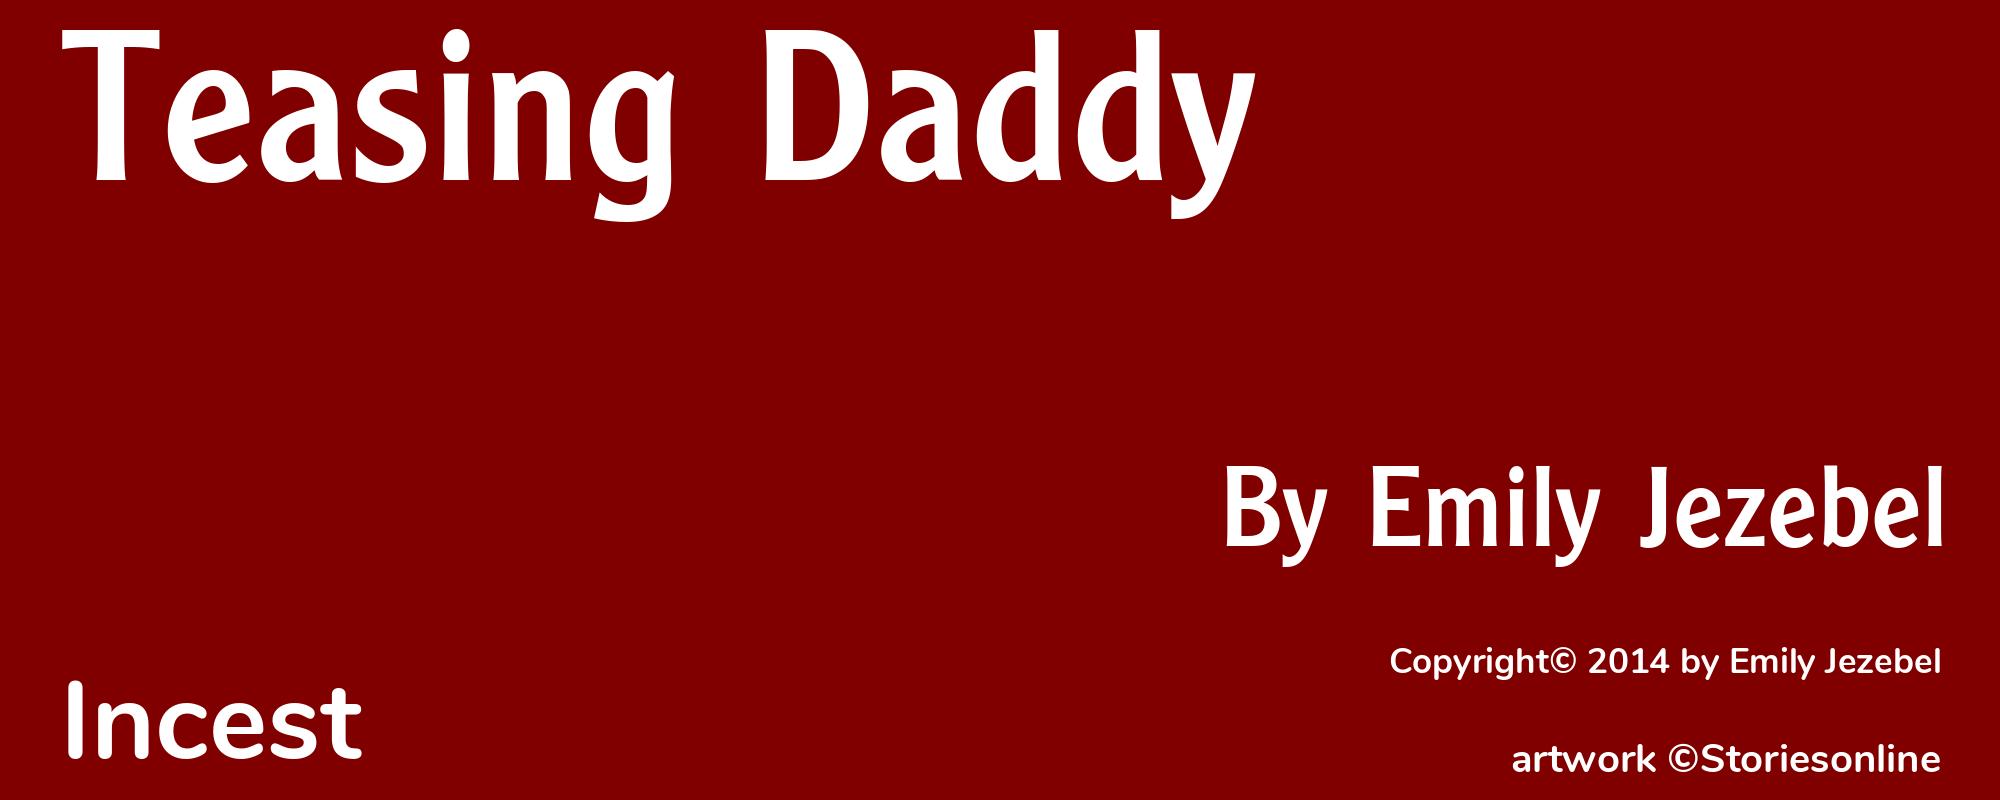 Teasing Daddy - Cover